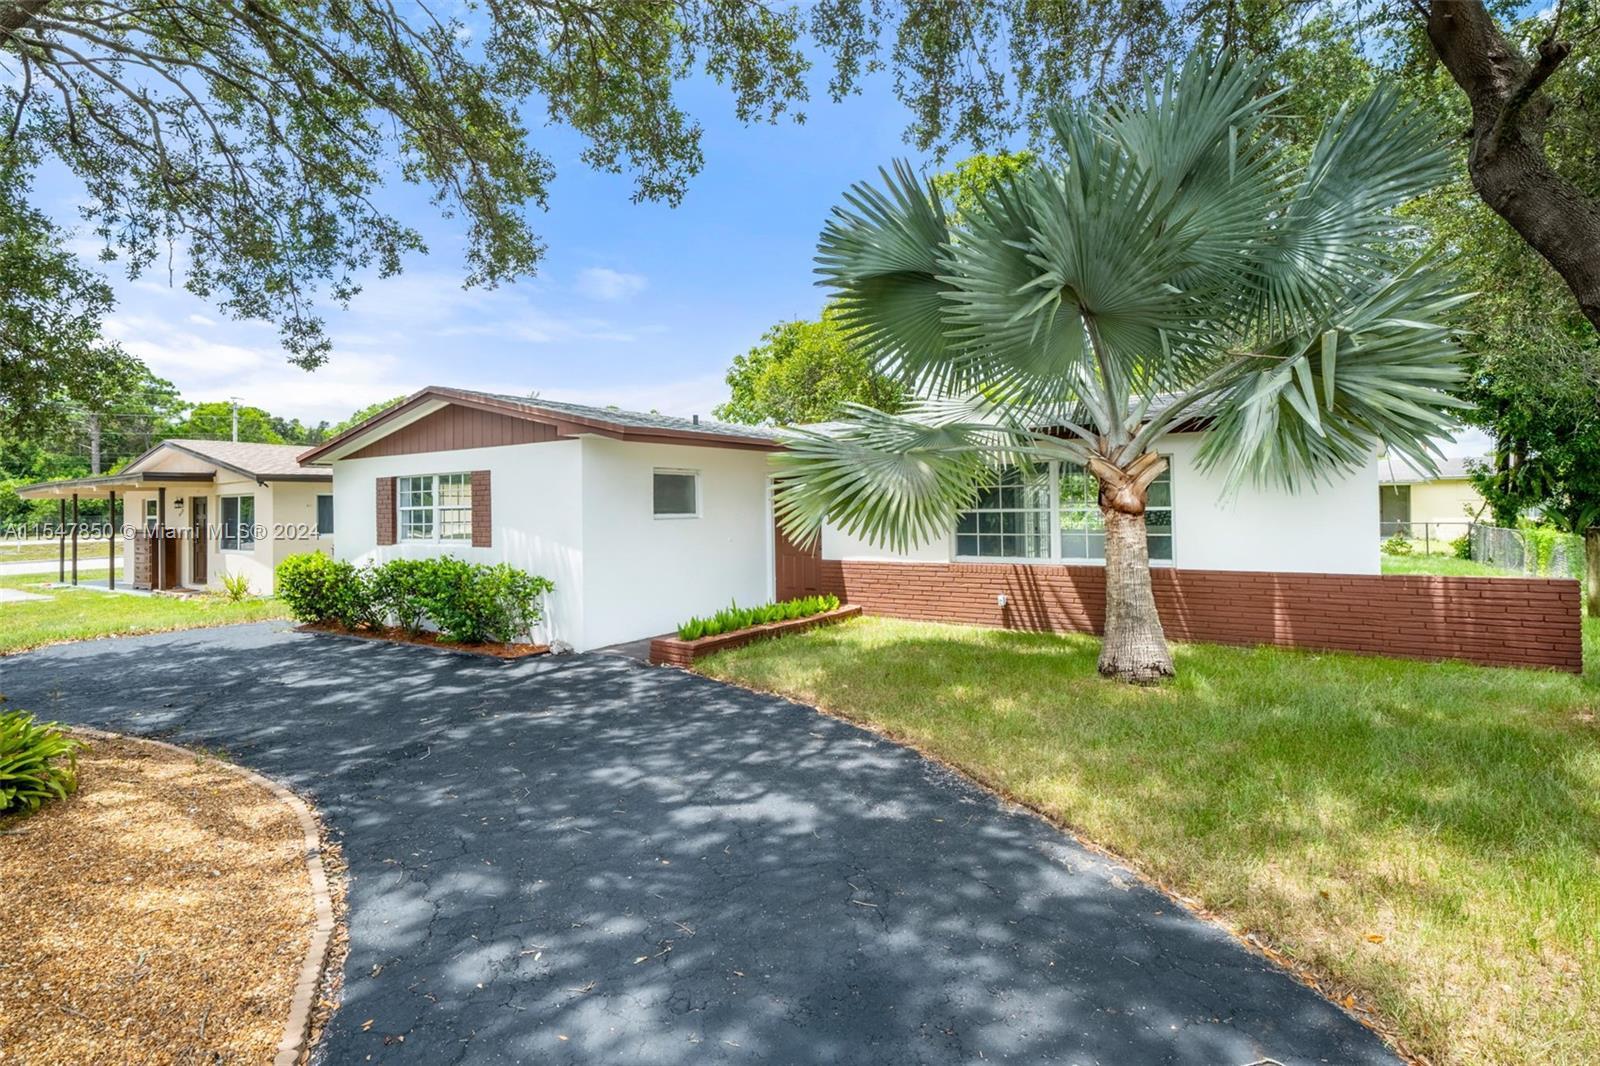 Photo of 5651 Rae Ave in West Palm Beach, FL